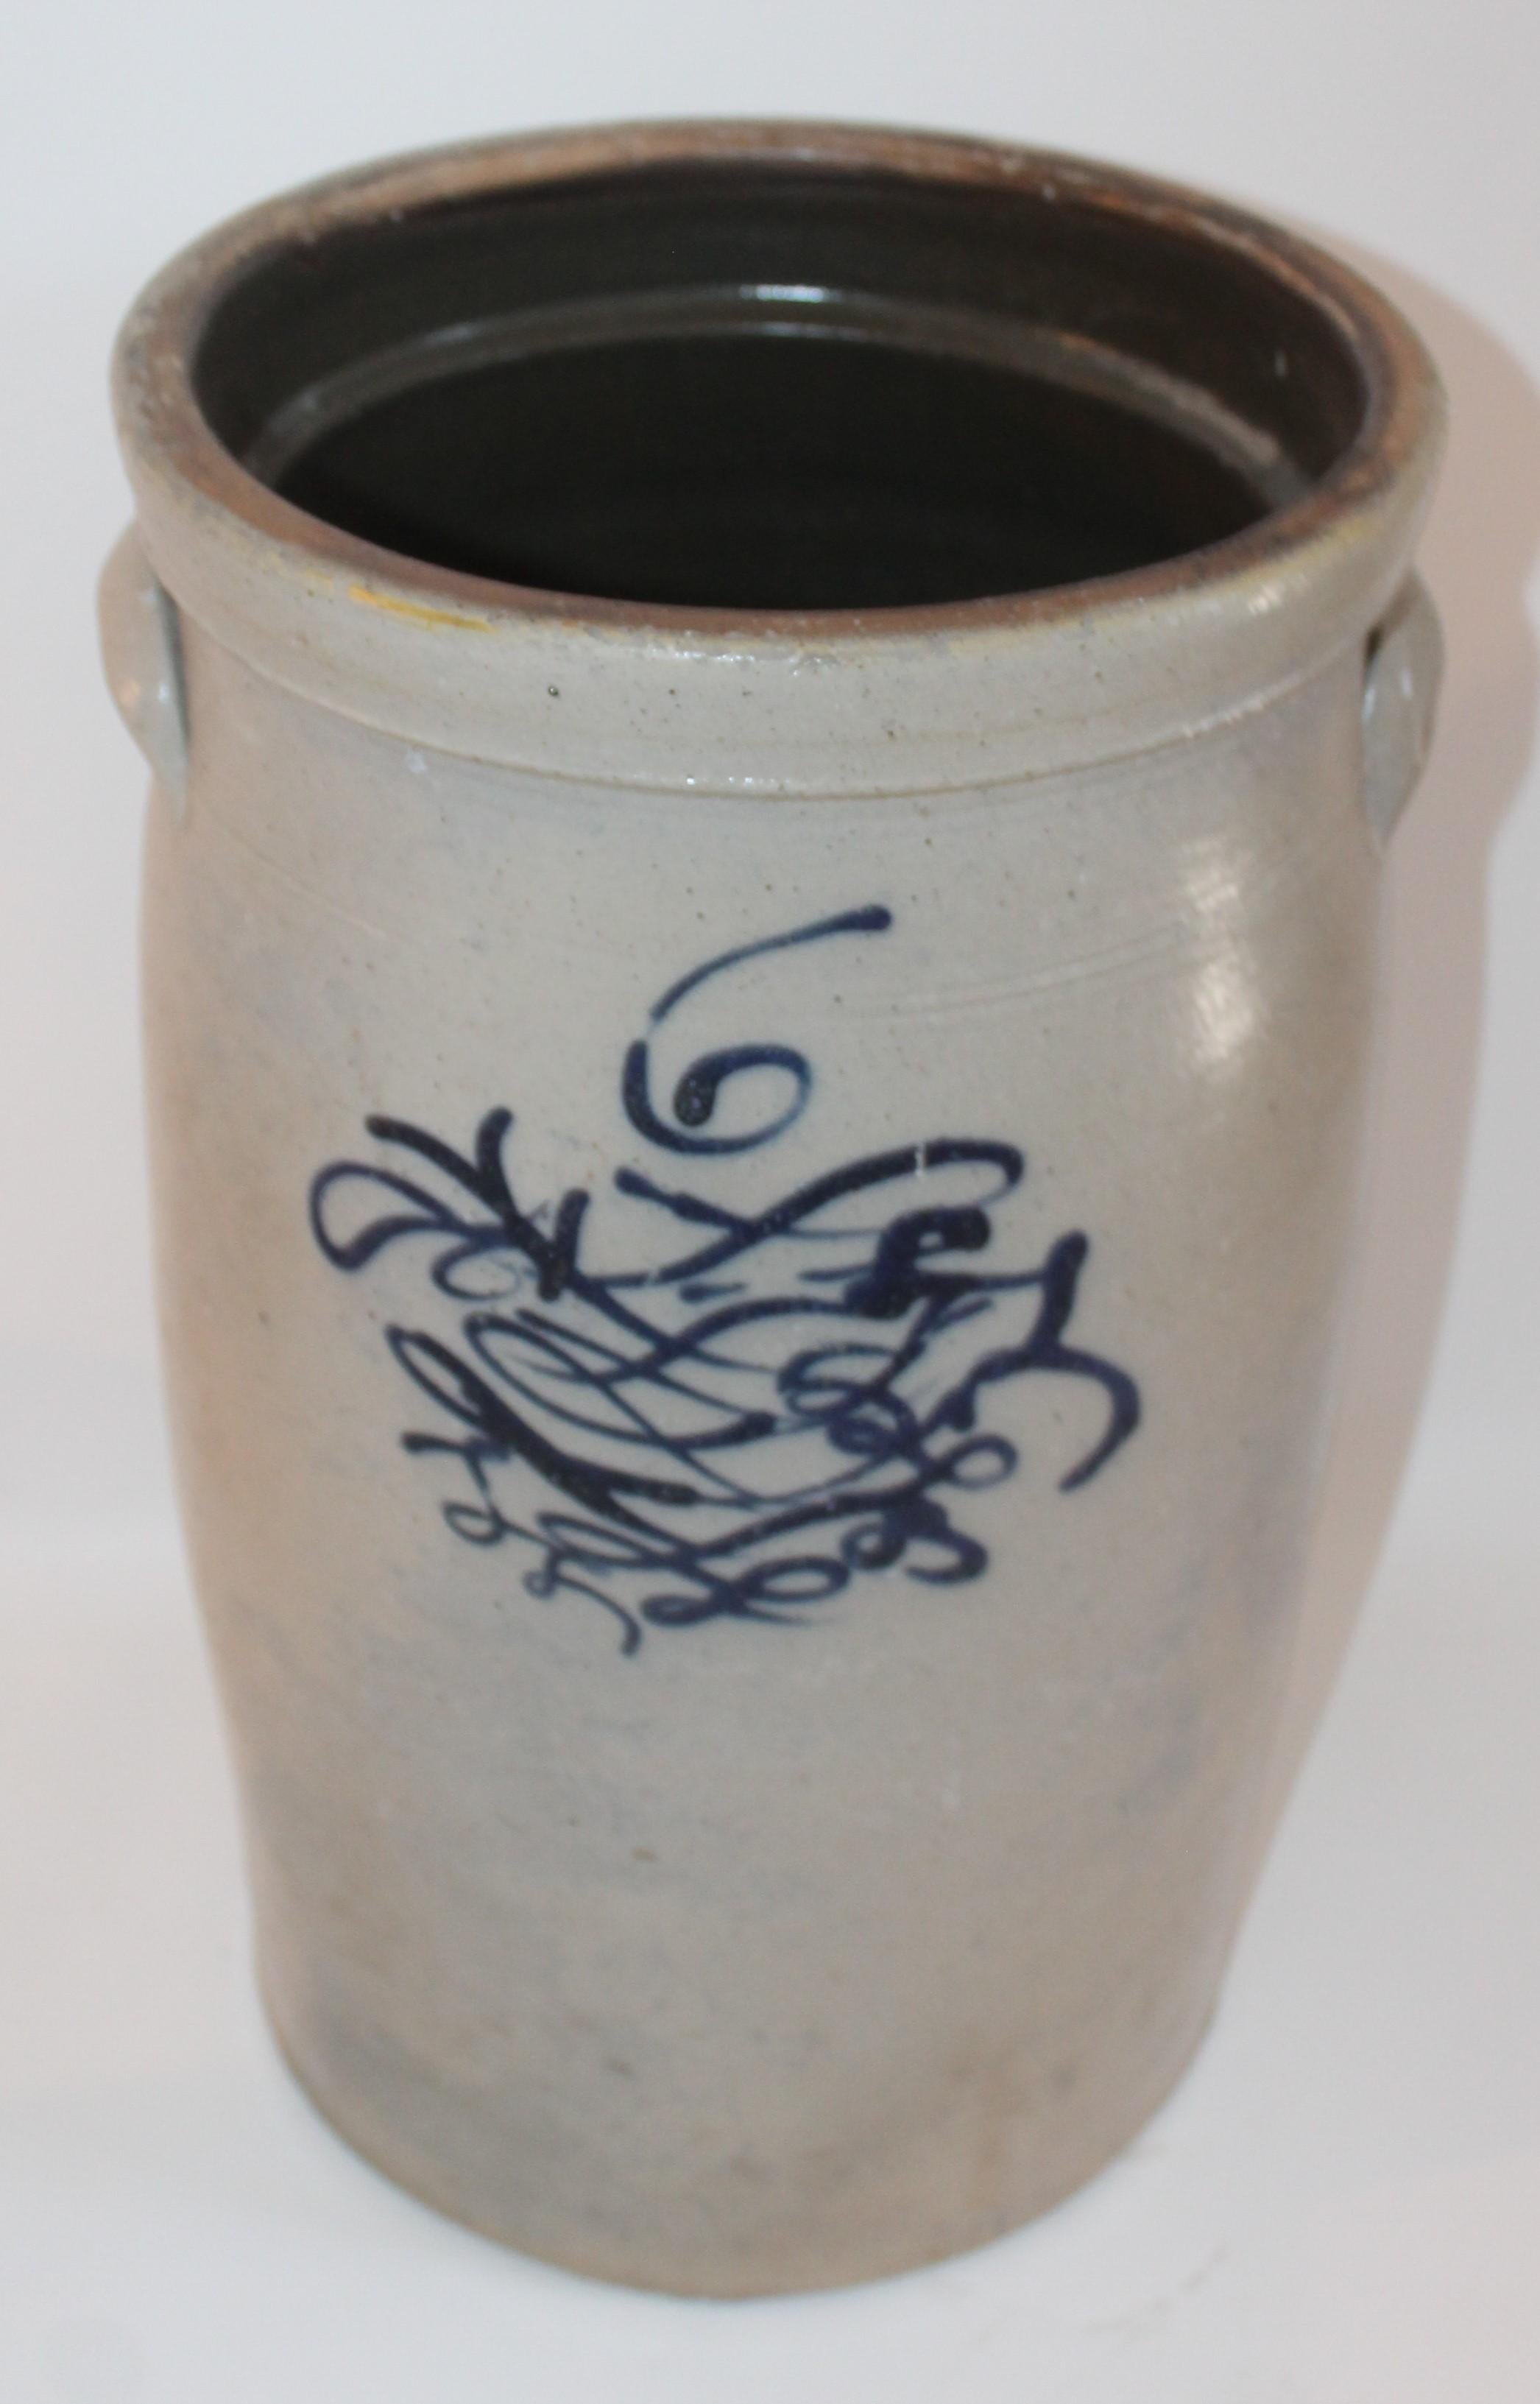 This fine butter churn has the salt glaze and blue decoration with a number six on the face of the crock. It has the doubled handles in fine condition.